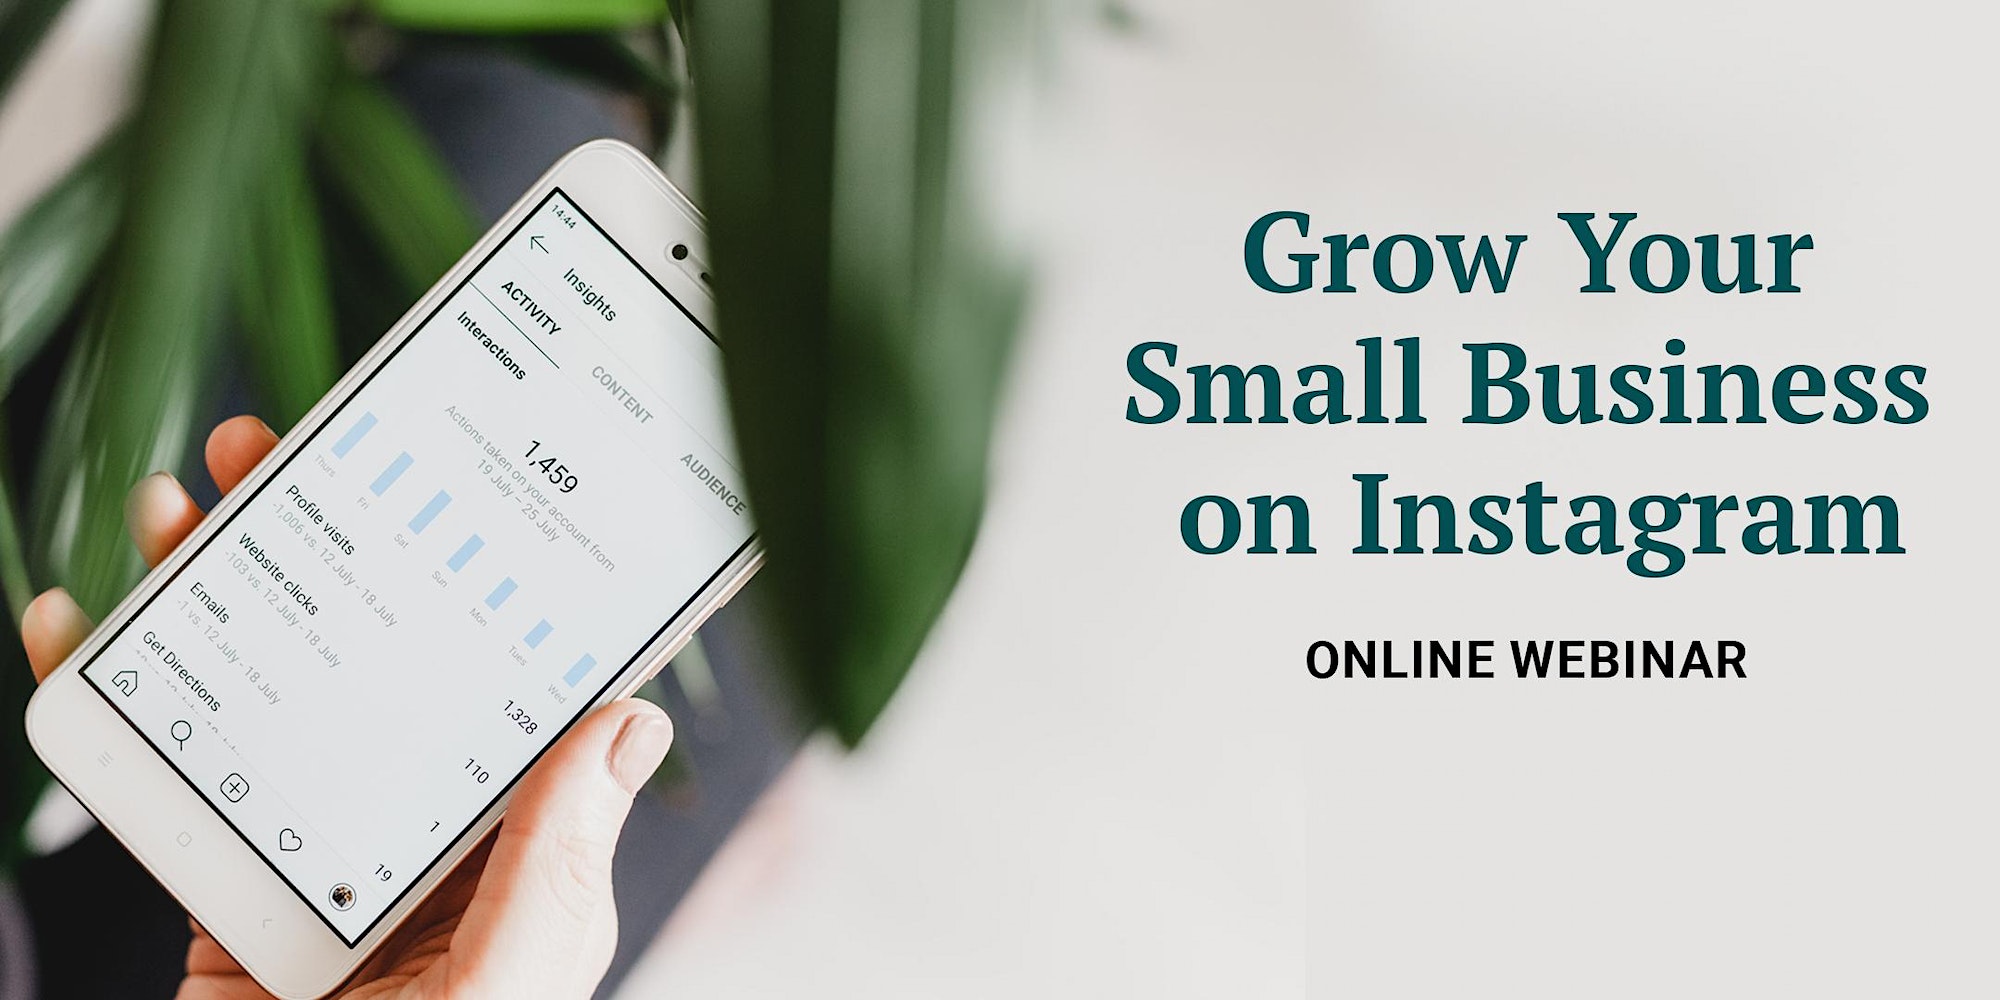 Grow Your Small Business on Instagram: Online Webinar